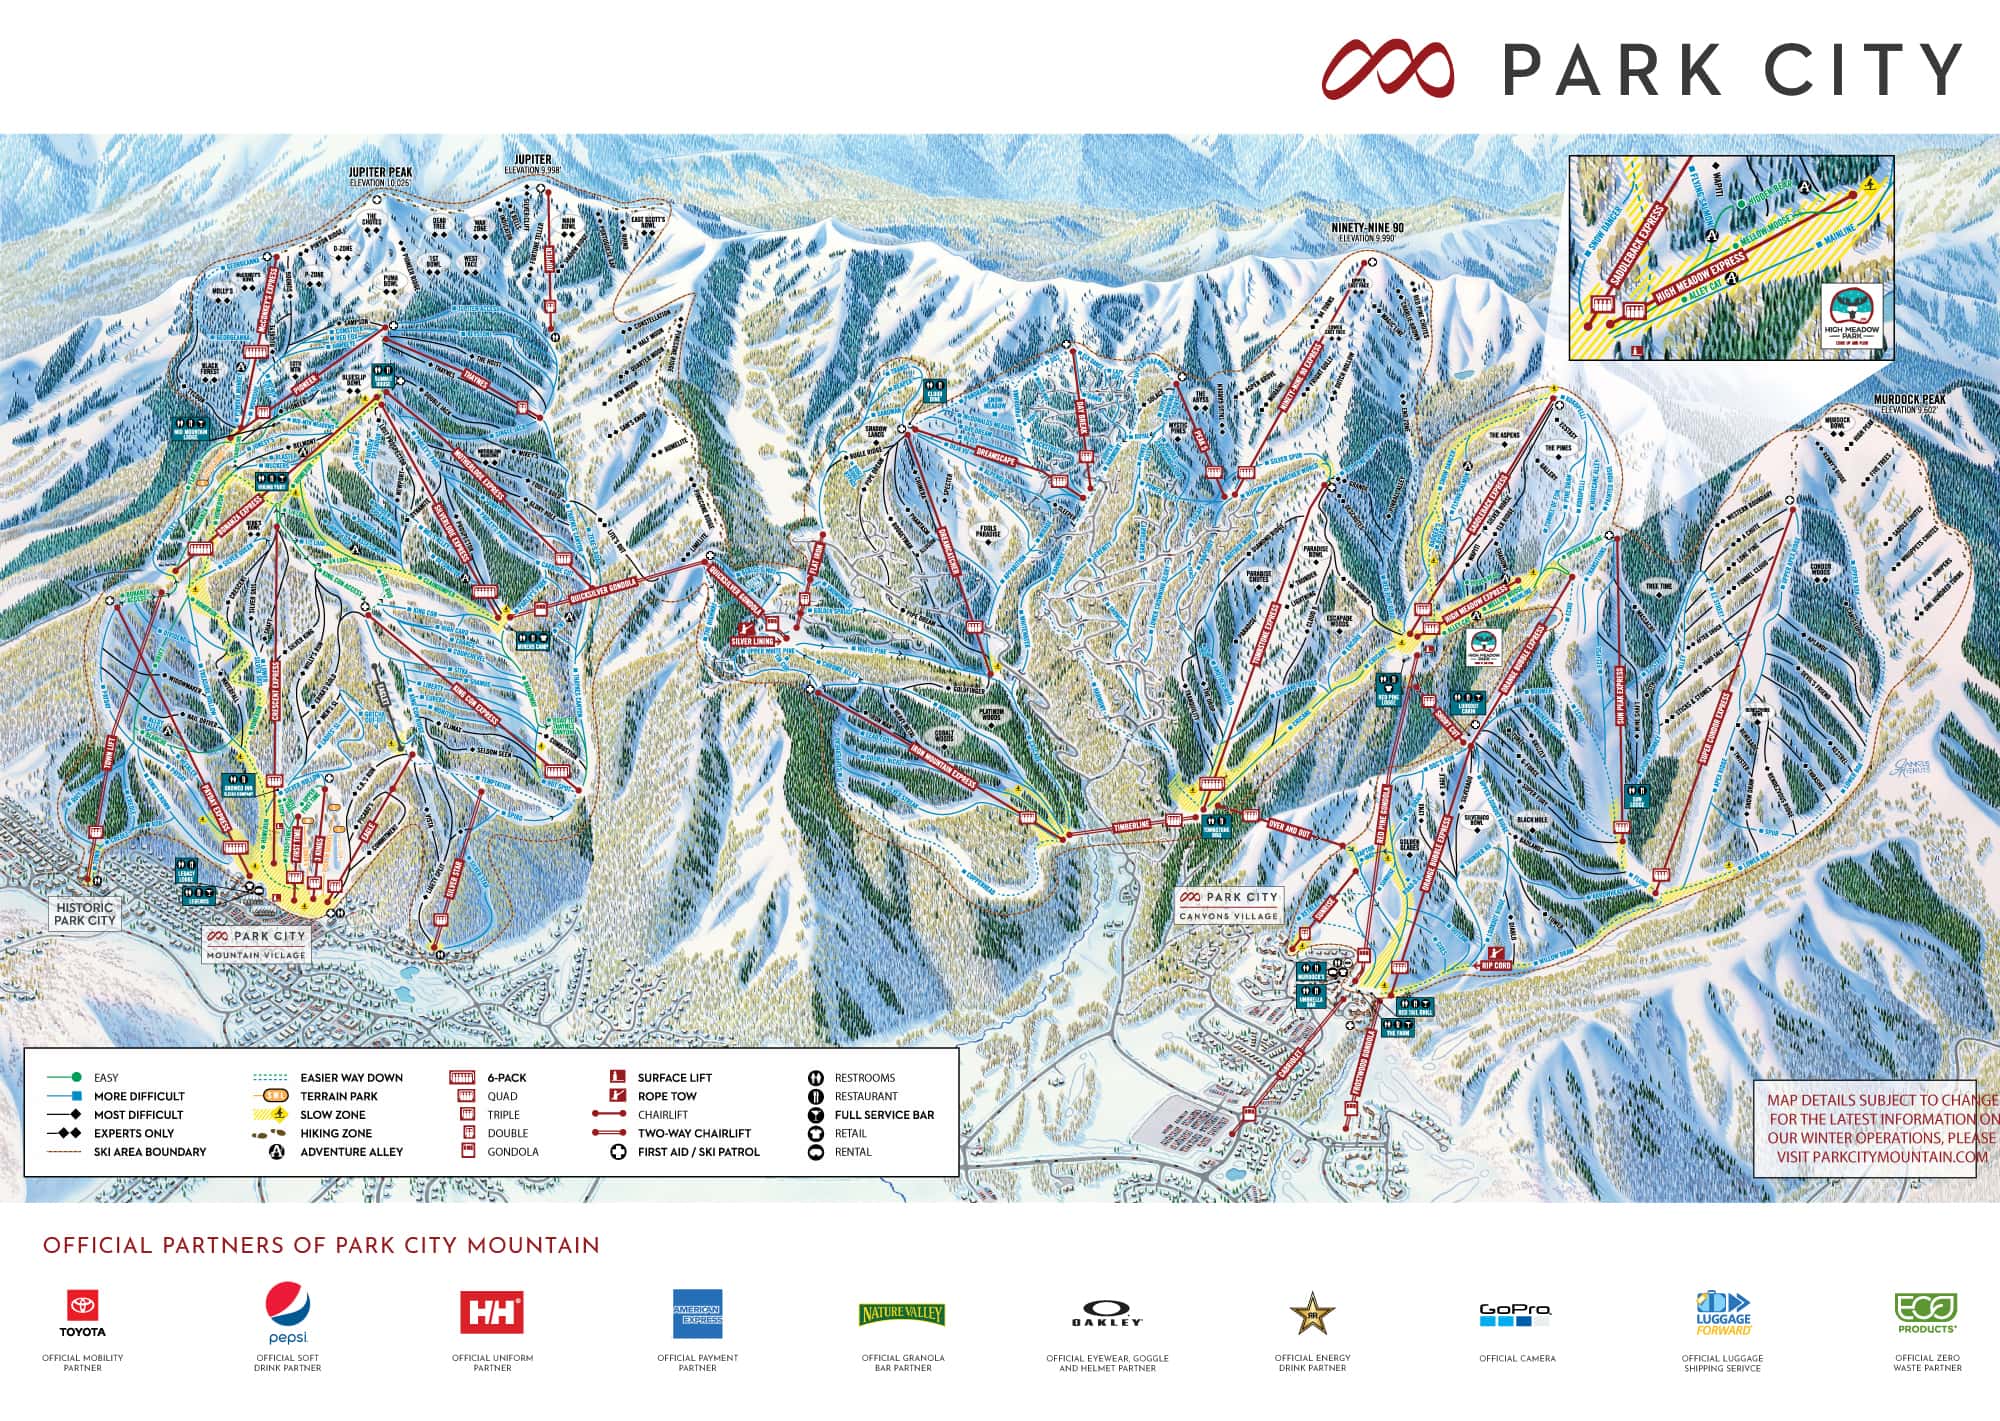 Here Are the 4 Best Ski Resorts Within a Short Drive of Park City